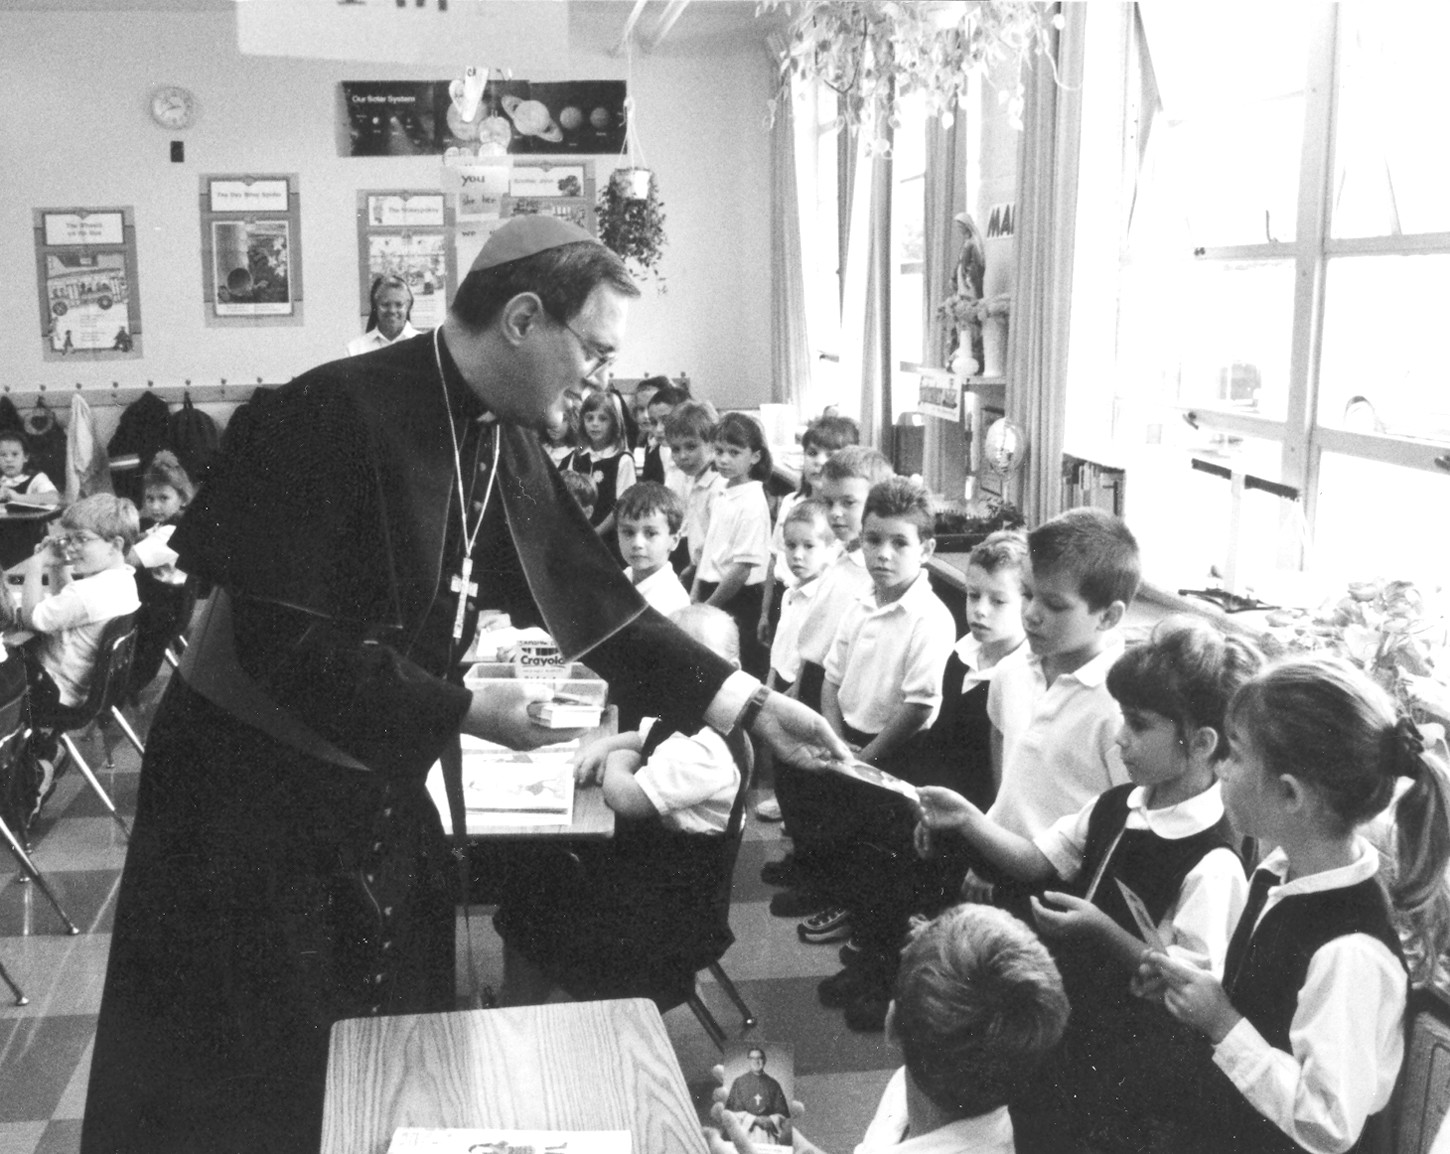 In a photo first featured in May 2005, in the farewell edition of The Catholic Exponent, the official newspaper of the Diocese of Youngstown, Bishop Tobin visits with Catholic school children. Youngstown’s Superintendent of Catholic Schools at the time, Dr. Michael Skube, shared that the most profound way Bishop Tobin witnessed to Catholic education was by visting schools to talk, listen and pray with students.